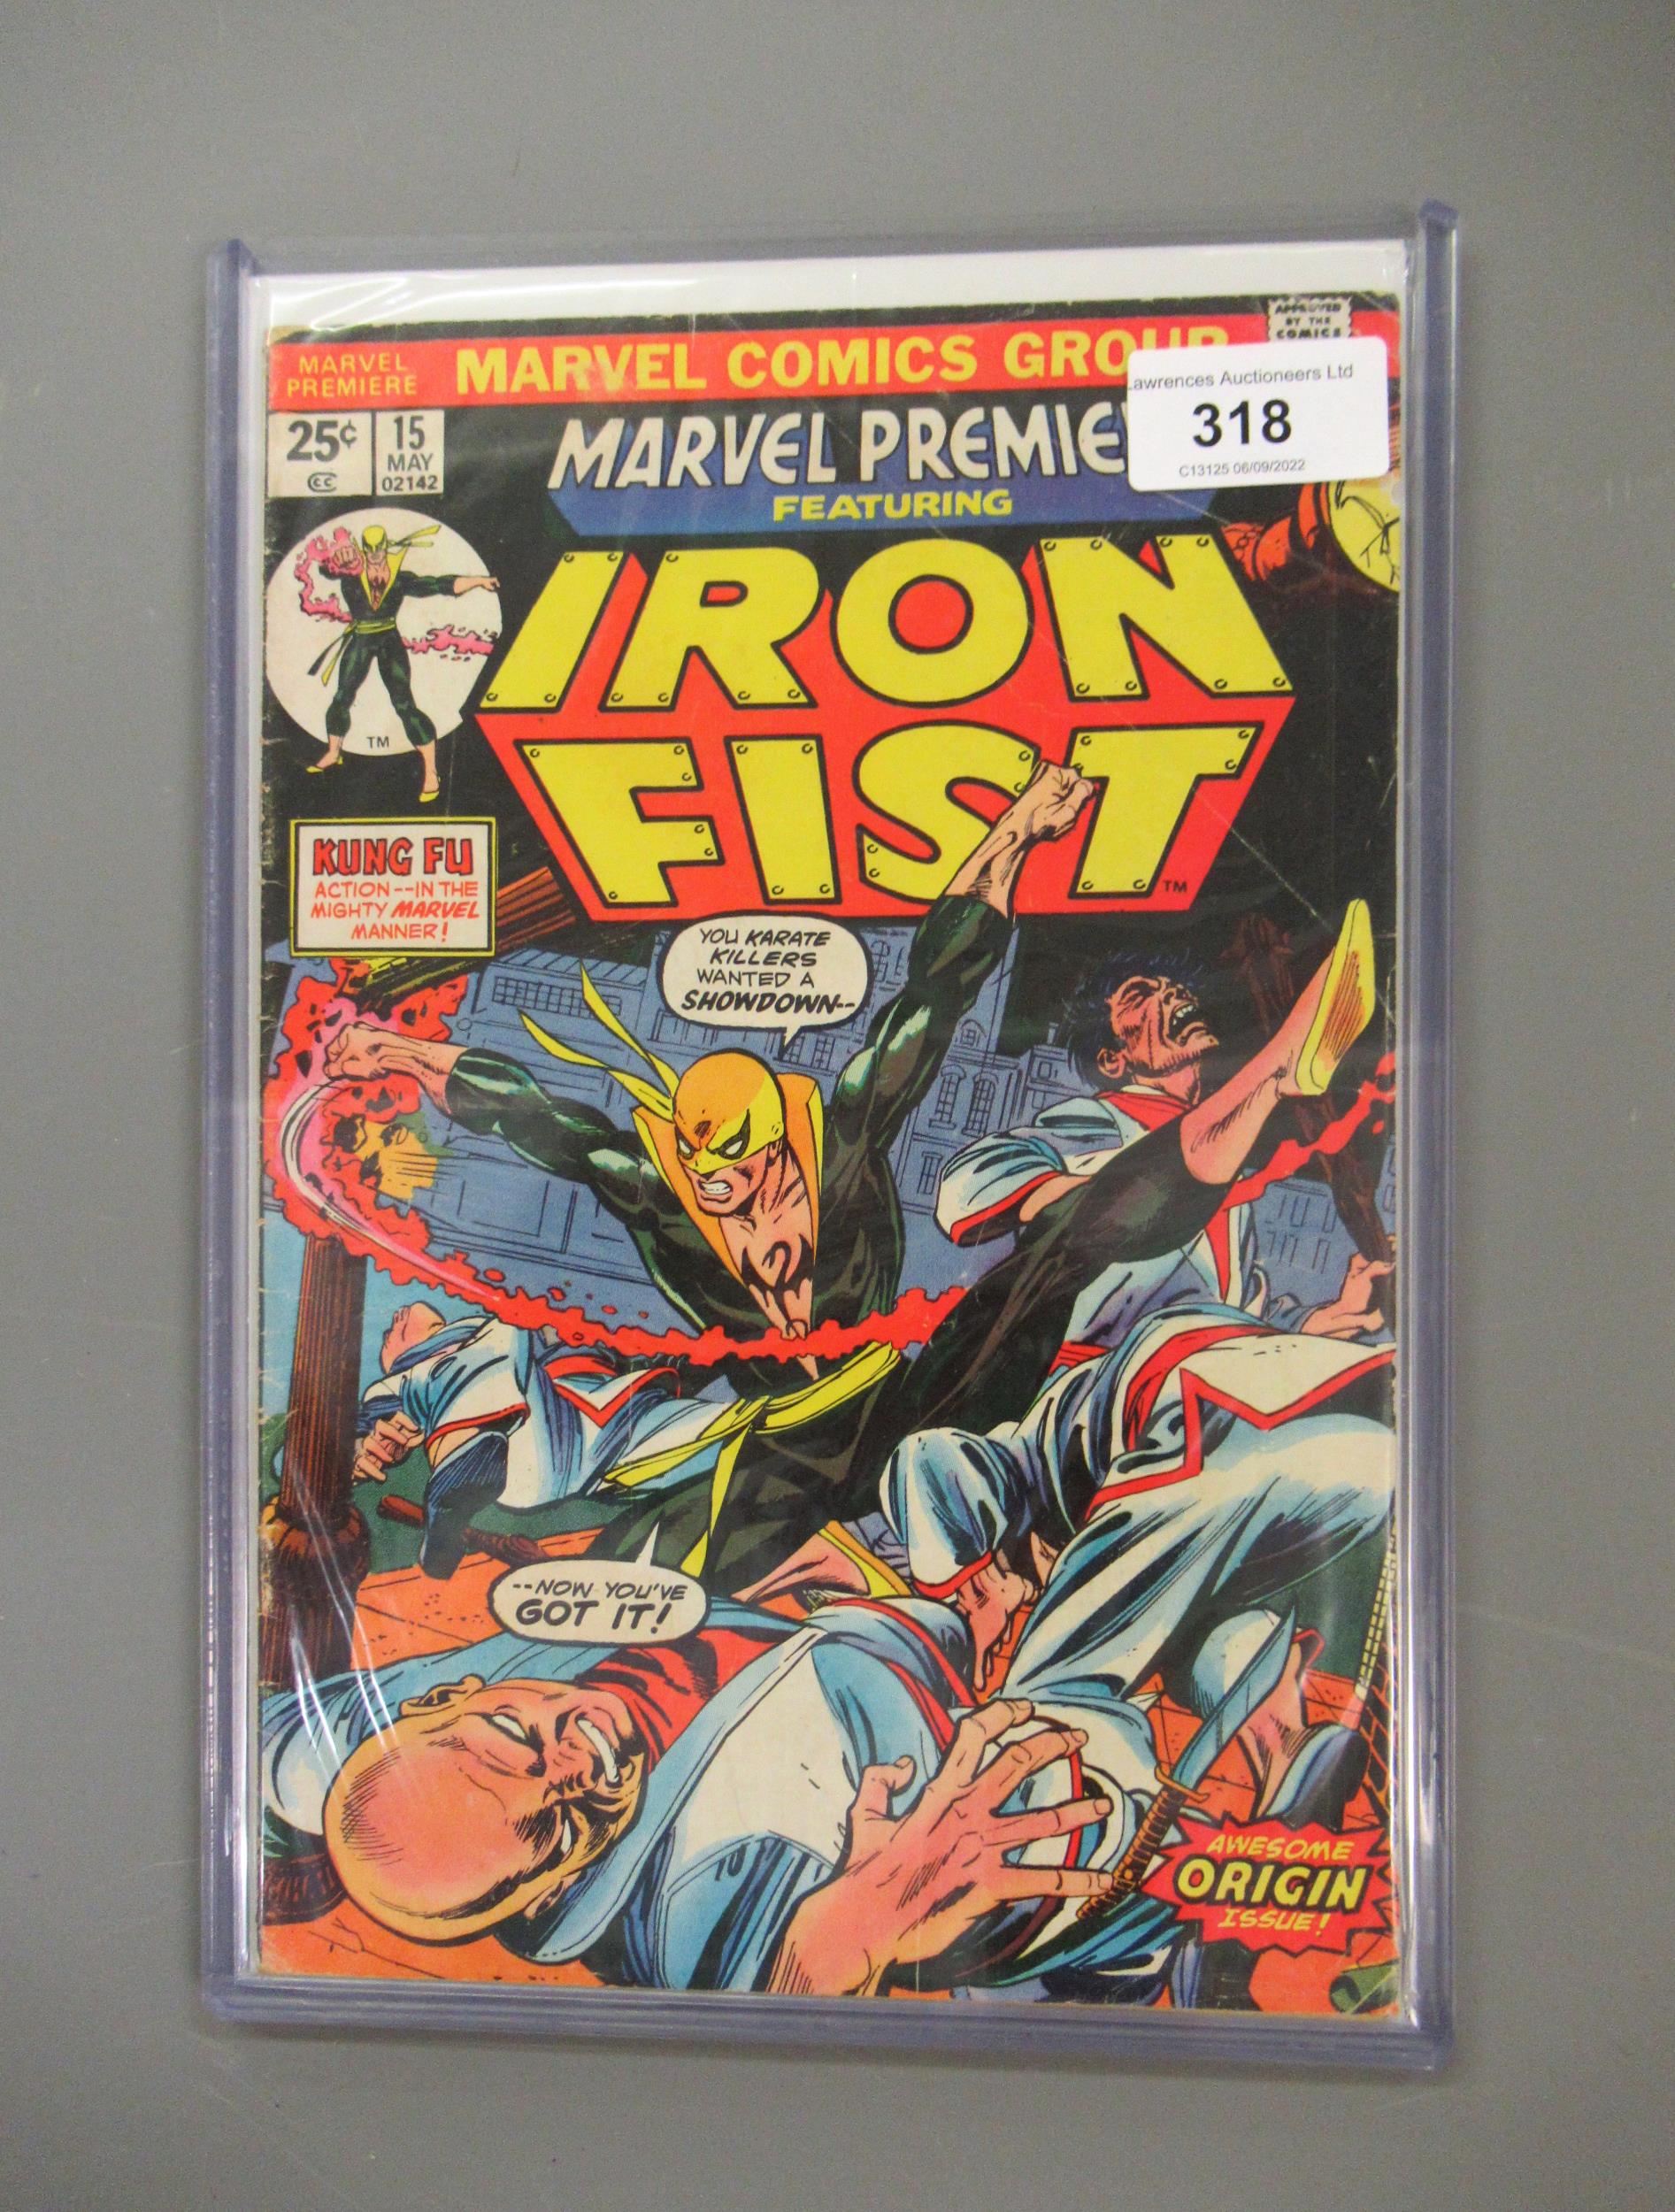 Marvel Comics, American issue Marvel Premier featuring ' Iron Fist ', No. 15 (the first appearance